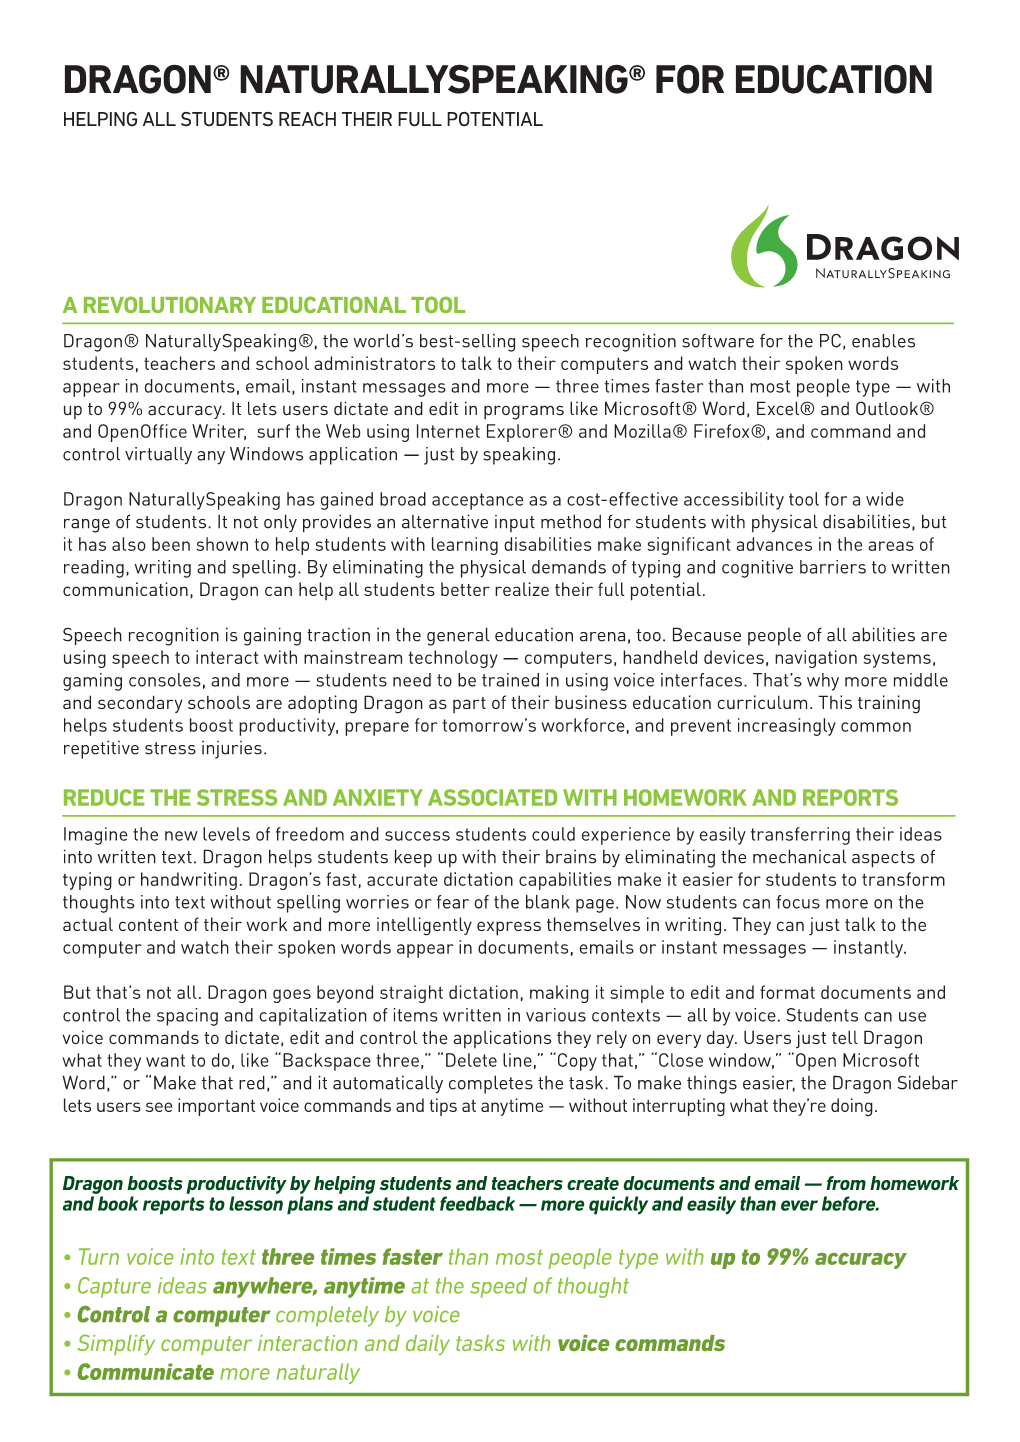 Dragon® Naturallyspeaking® for Education Helping All Students Reach Their Full Potential